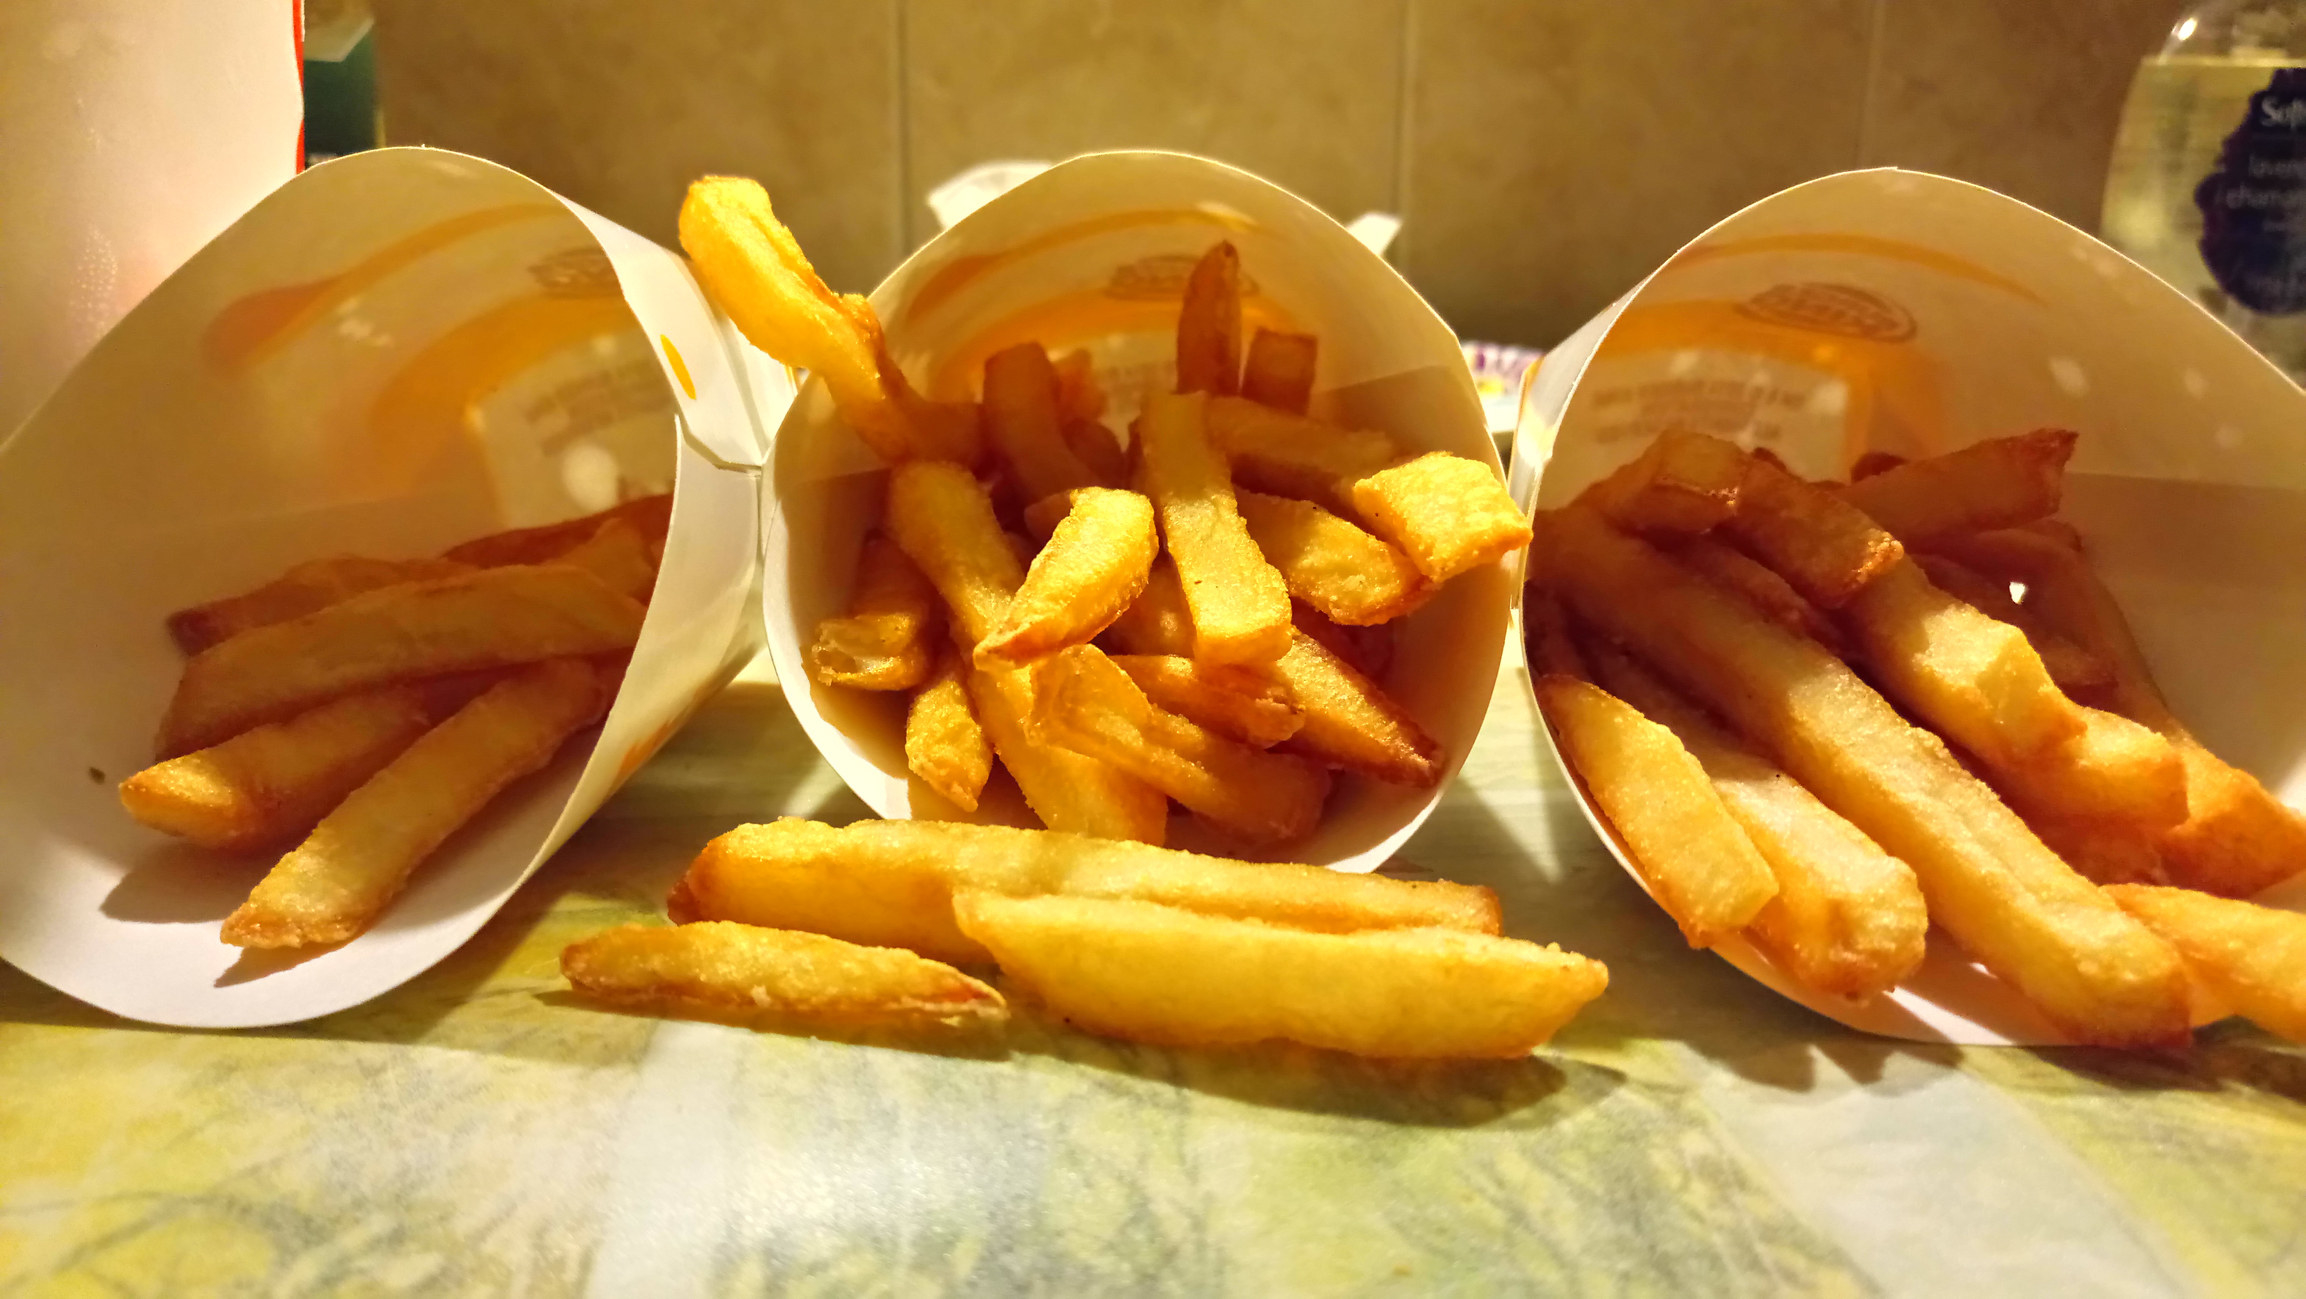 three containers of burger king fries